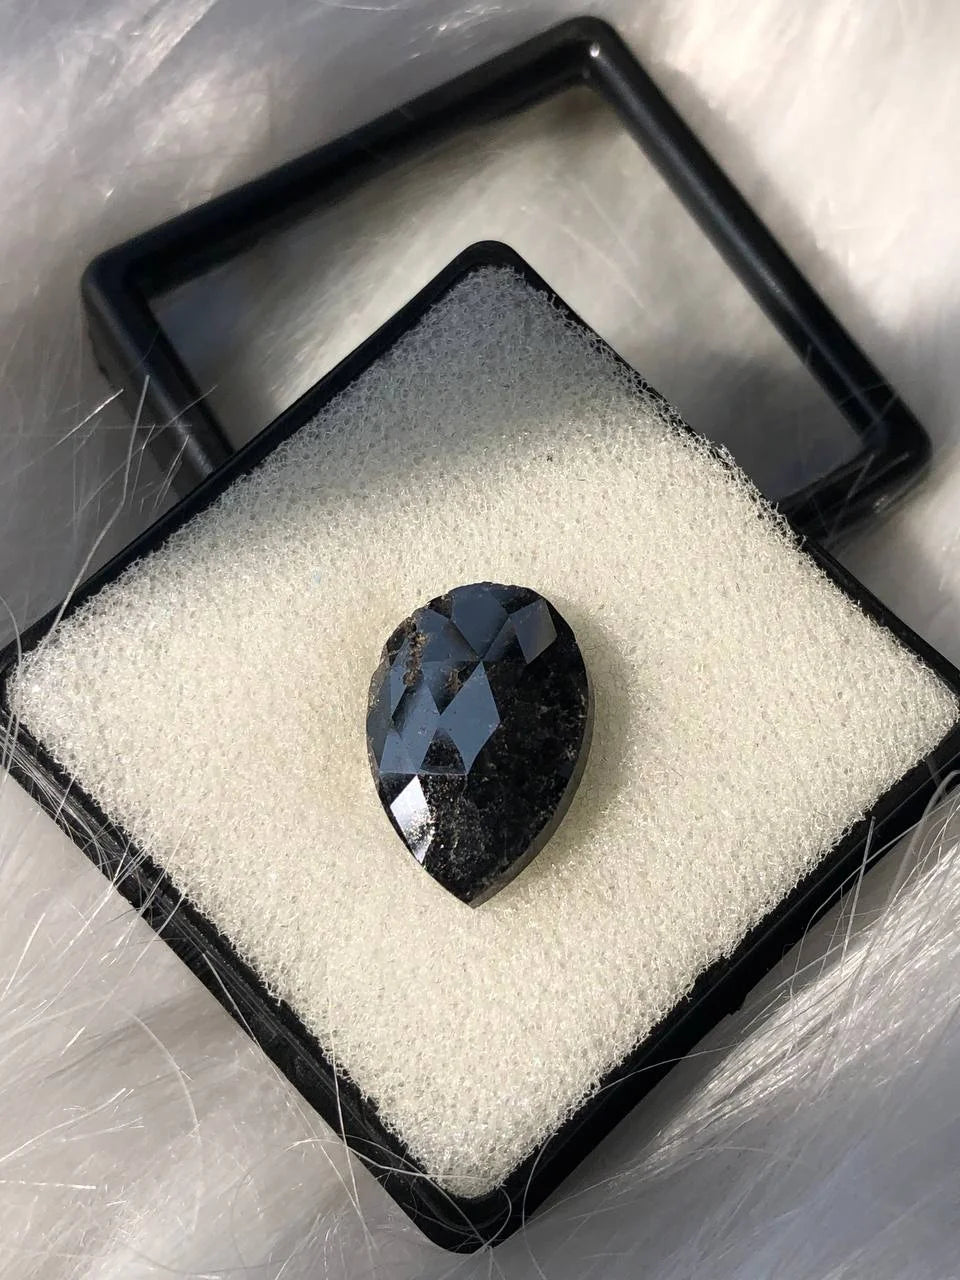 8.2 Ct Natural Pear Shape Black Diamond Exquisite for High-End Jewelry Designs